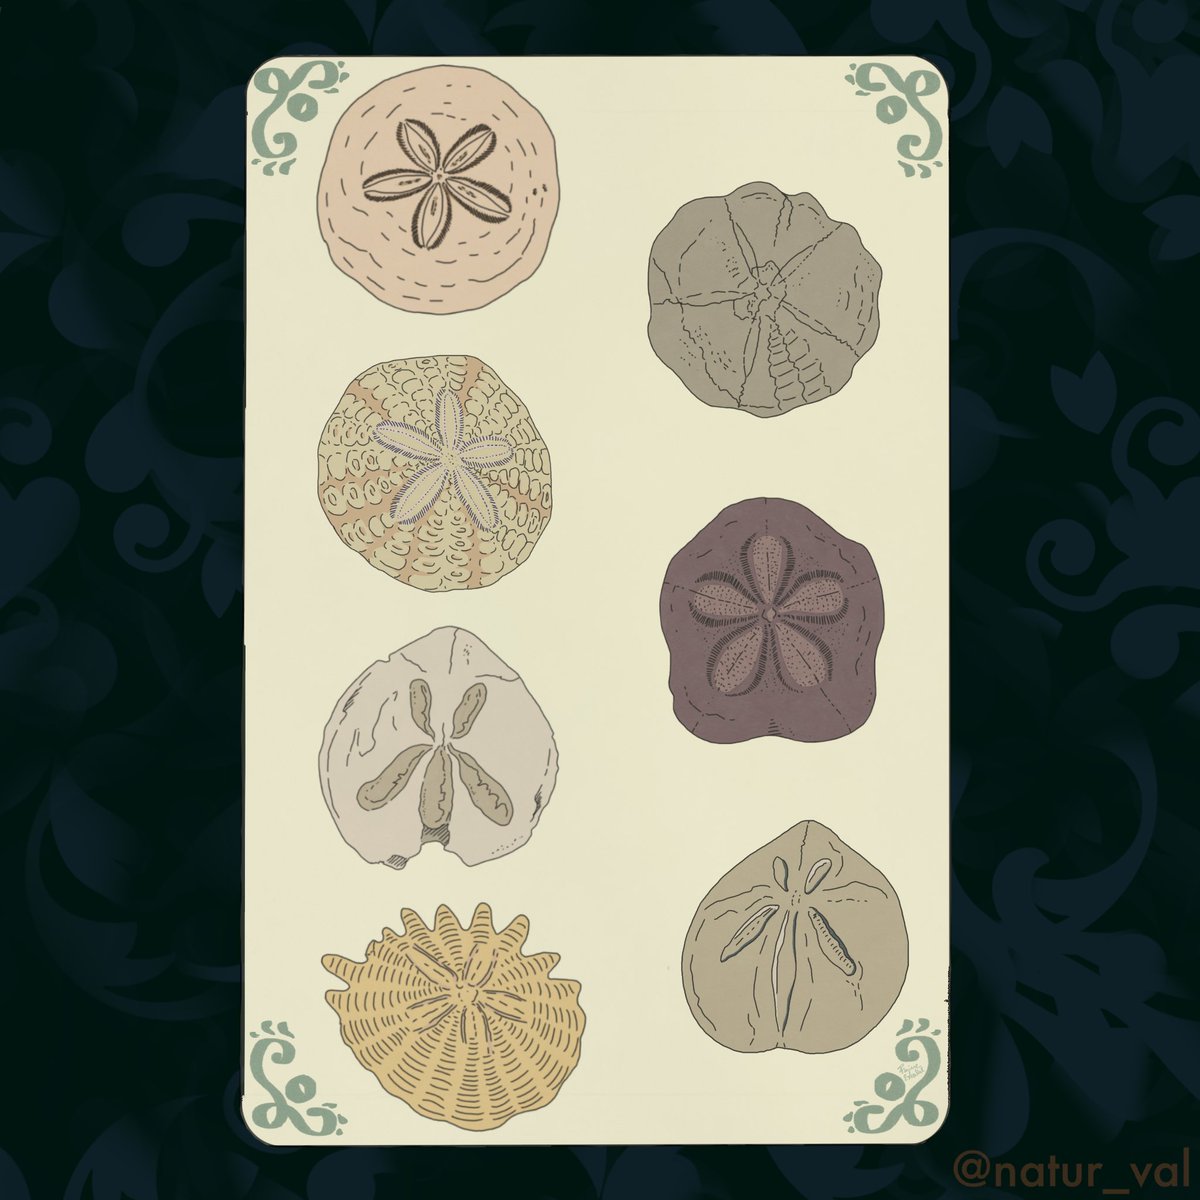 Tarots Before Time - Deniers. The suit of Pentacles. I chose “sand dollars” fossils, i.e. echinoids of the Dendrasteridae family characterized by a rounded and flattened shape that resembles a coin. 7: good investments